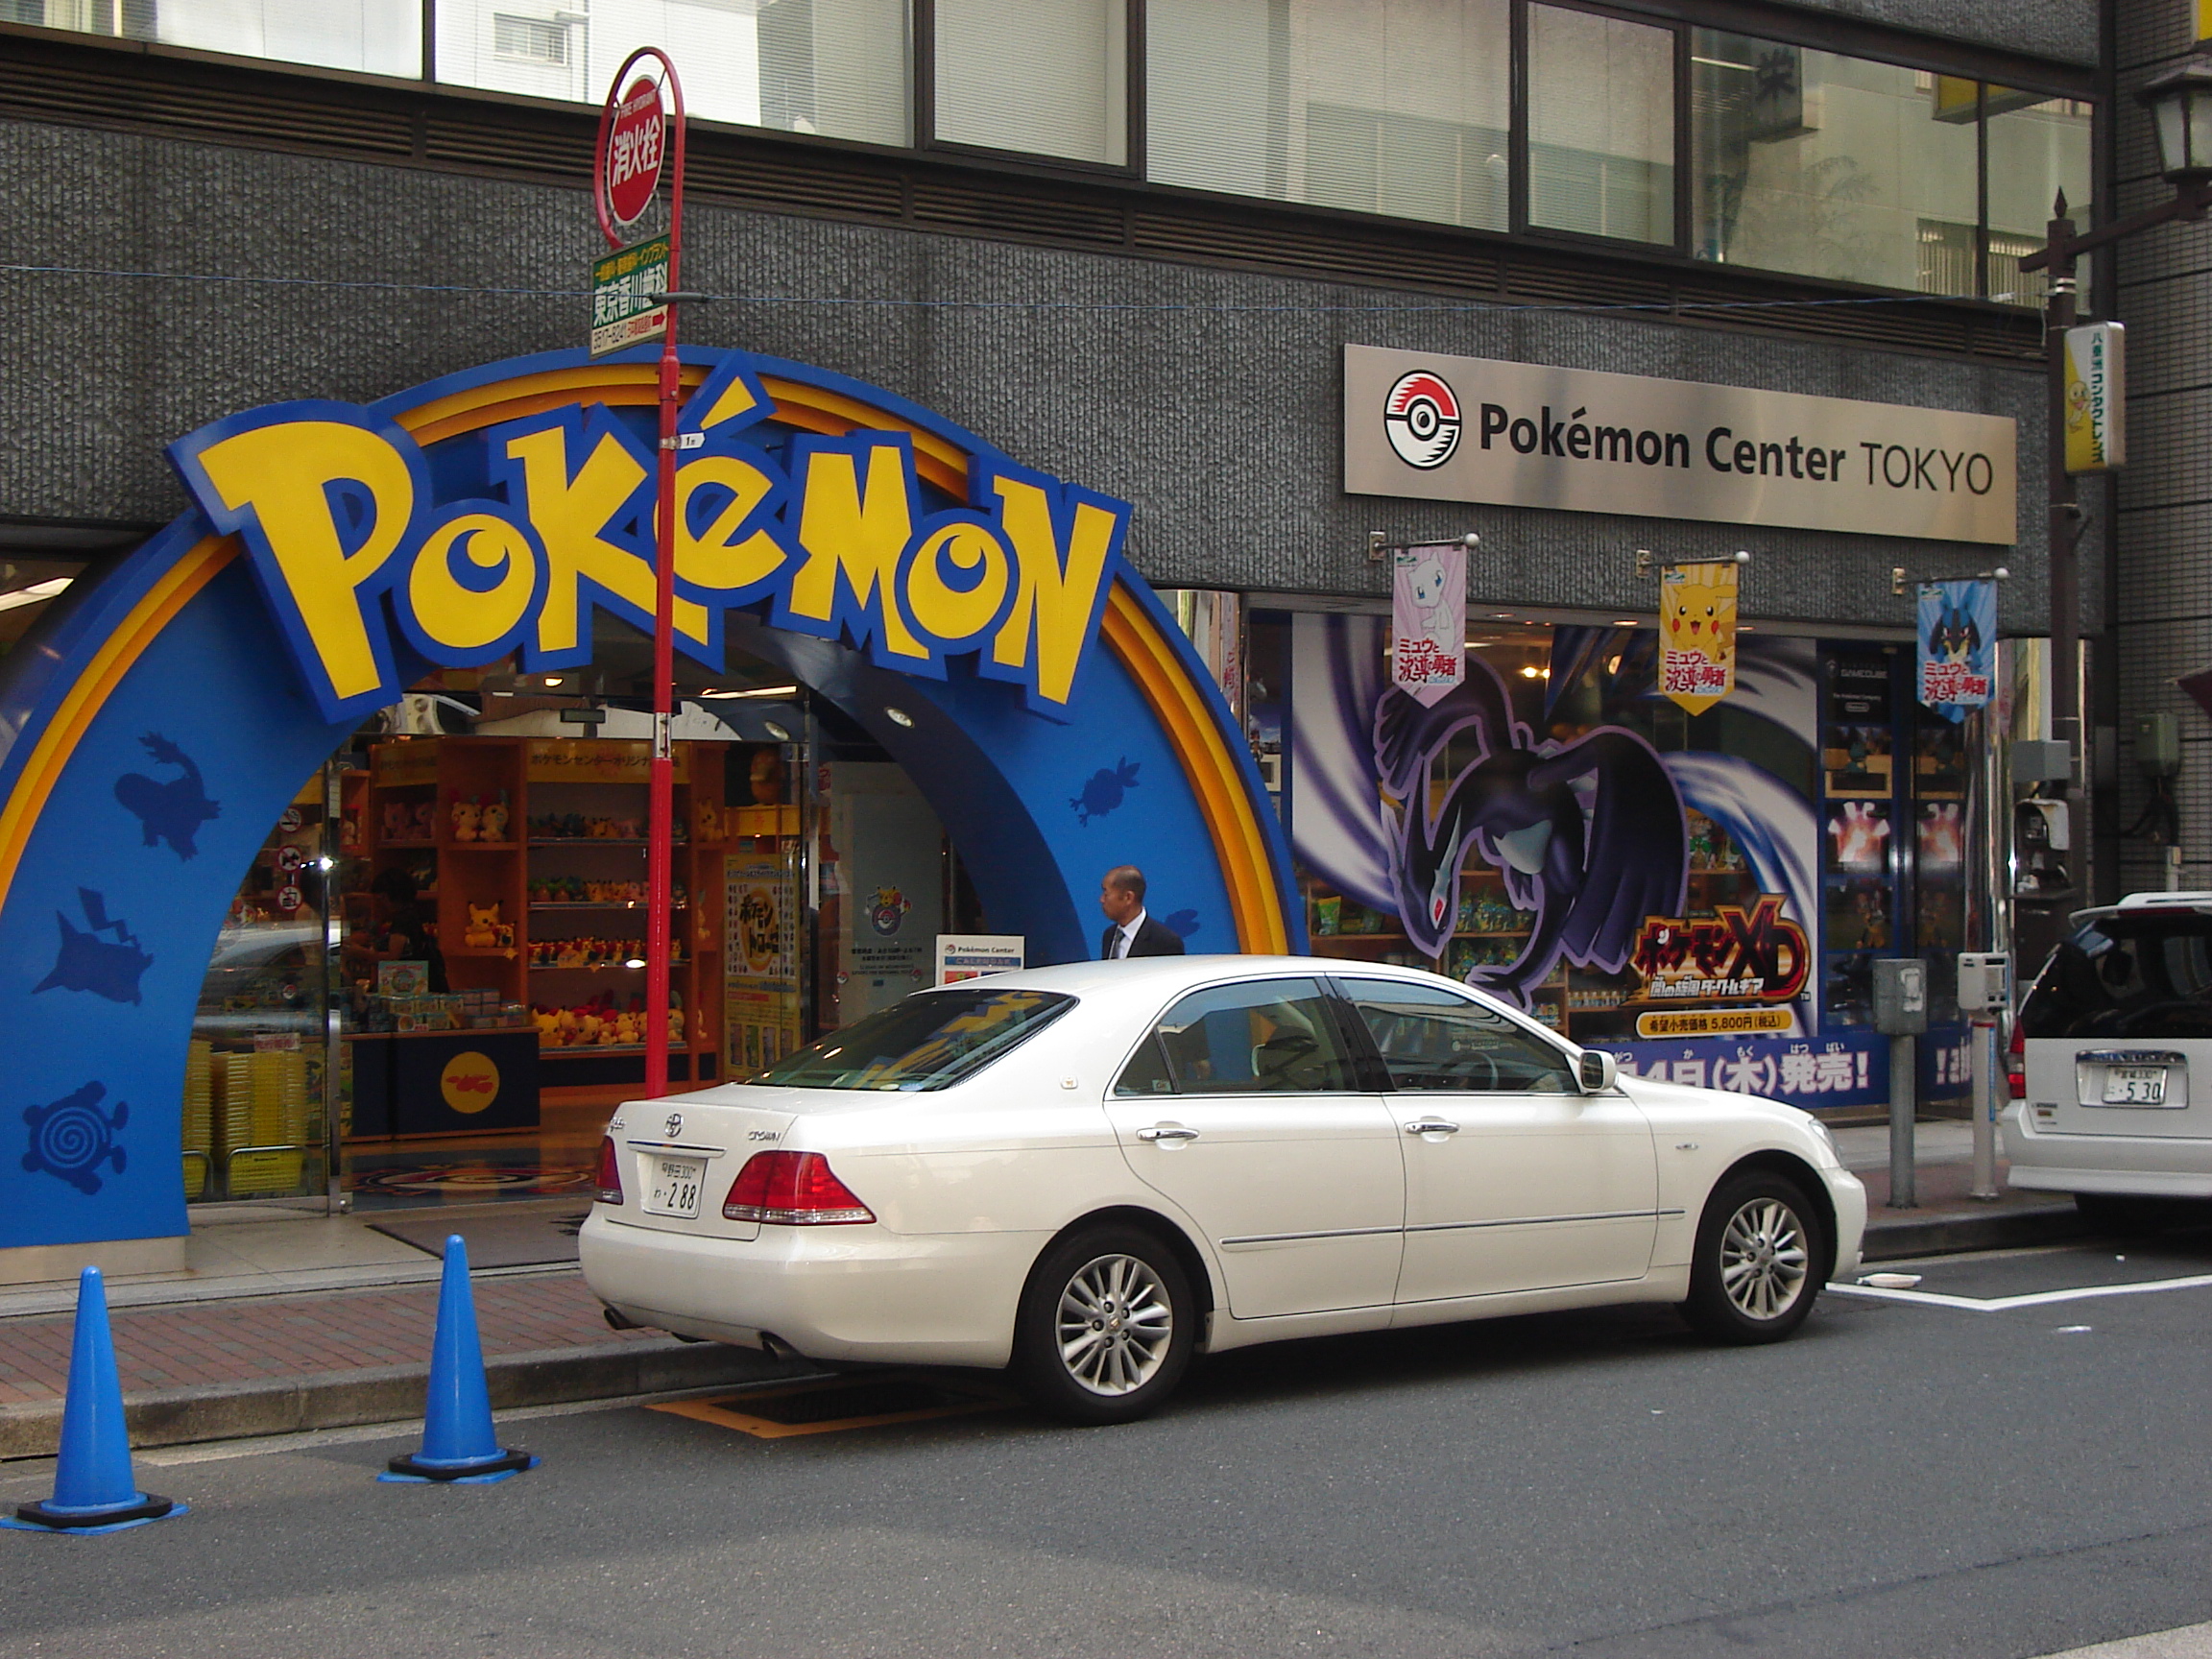 a curved blue entryway with a large pokémon logo on a grey building